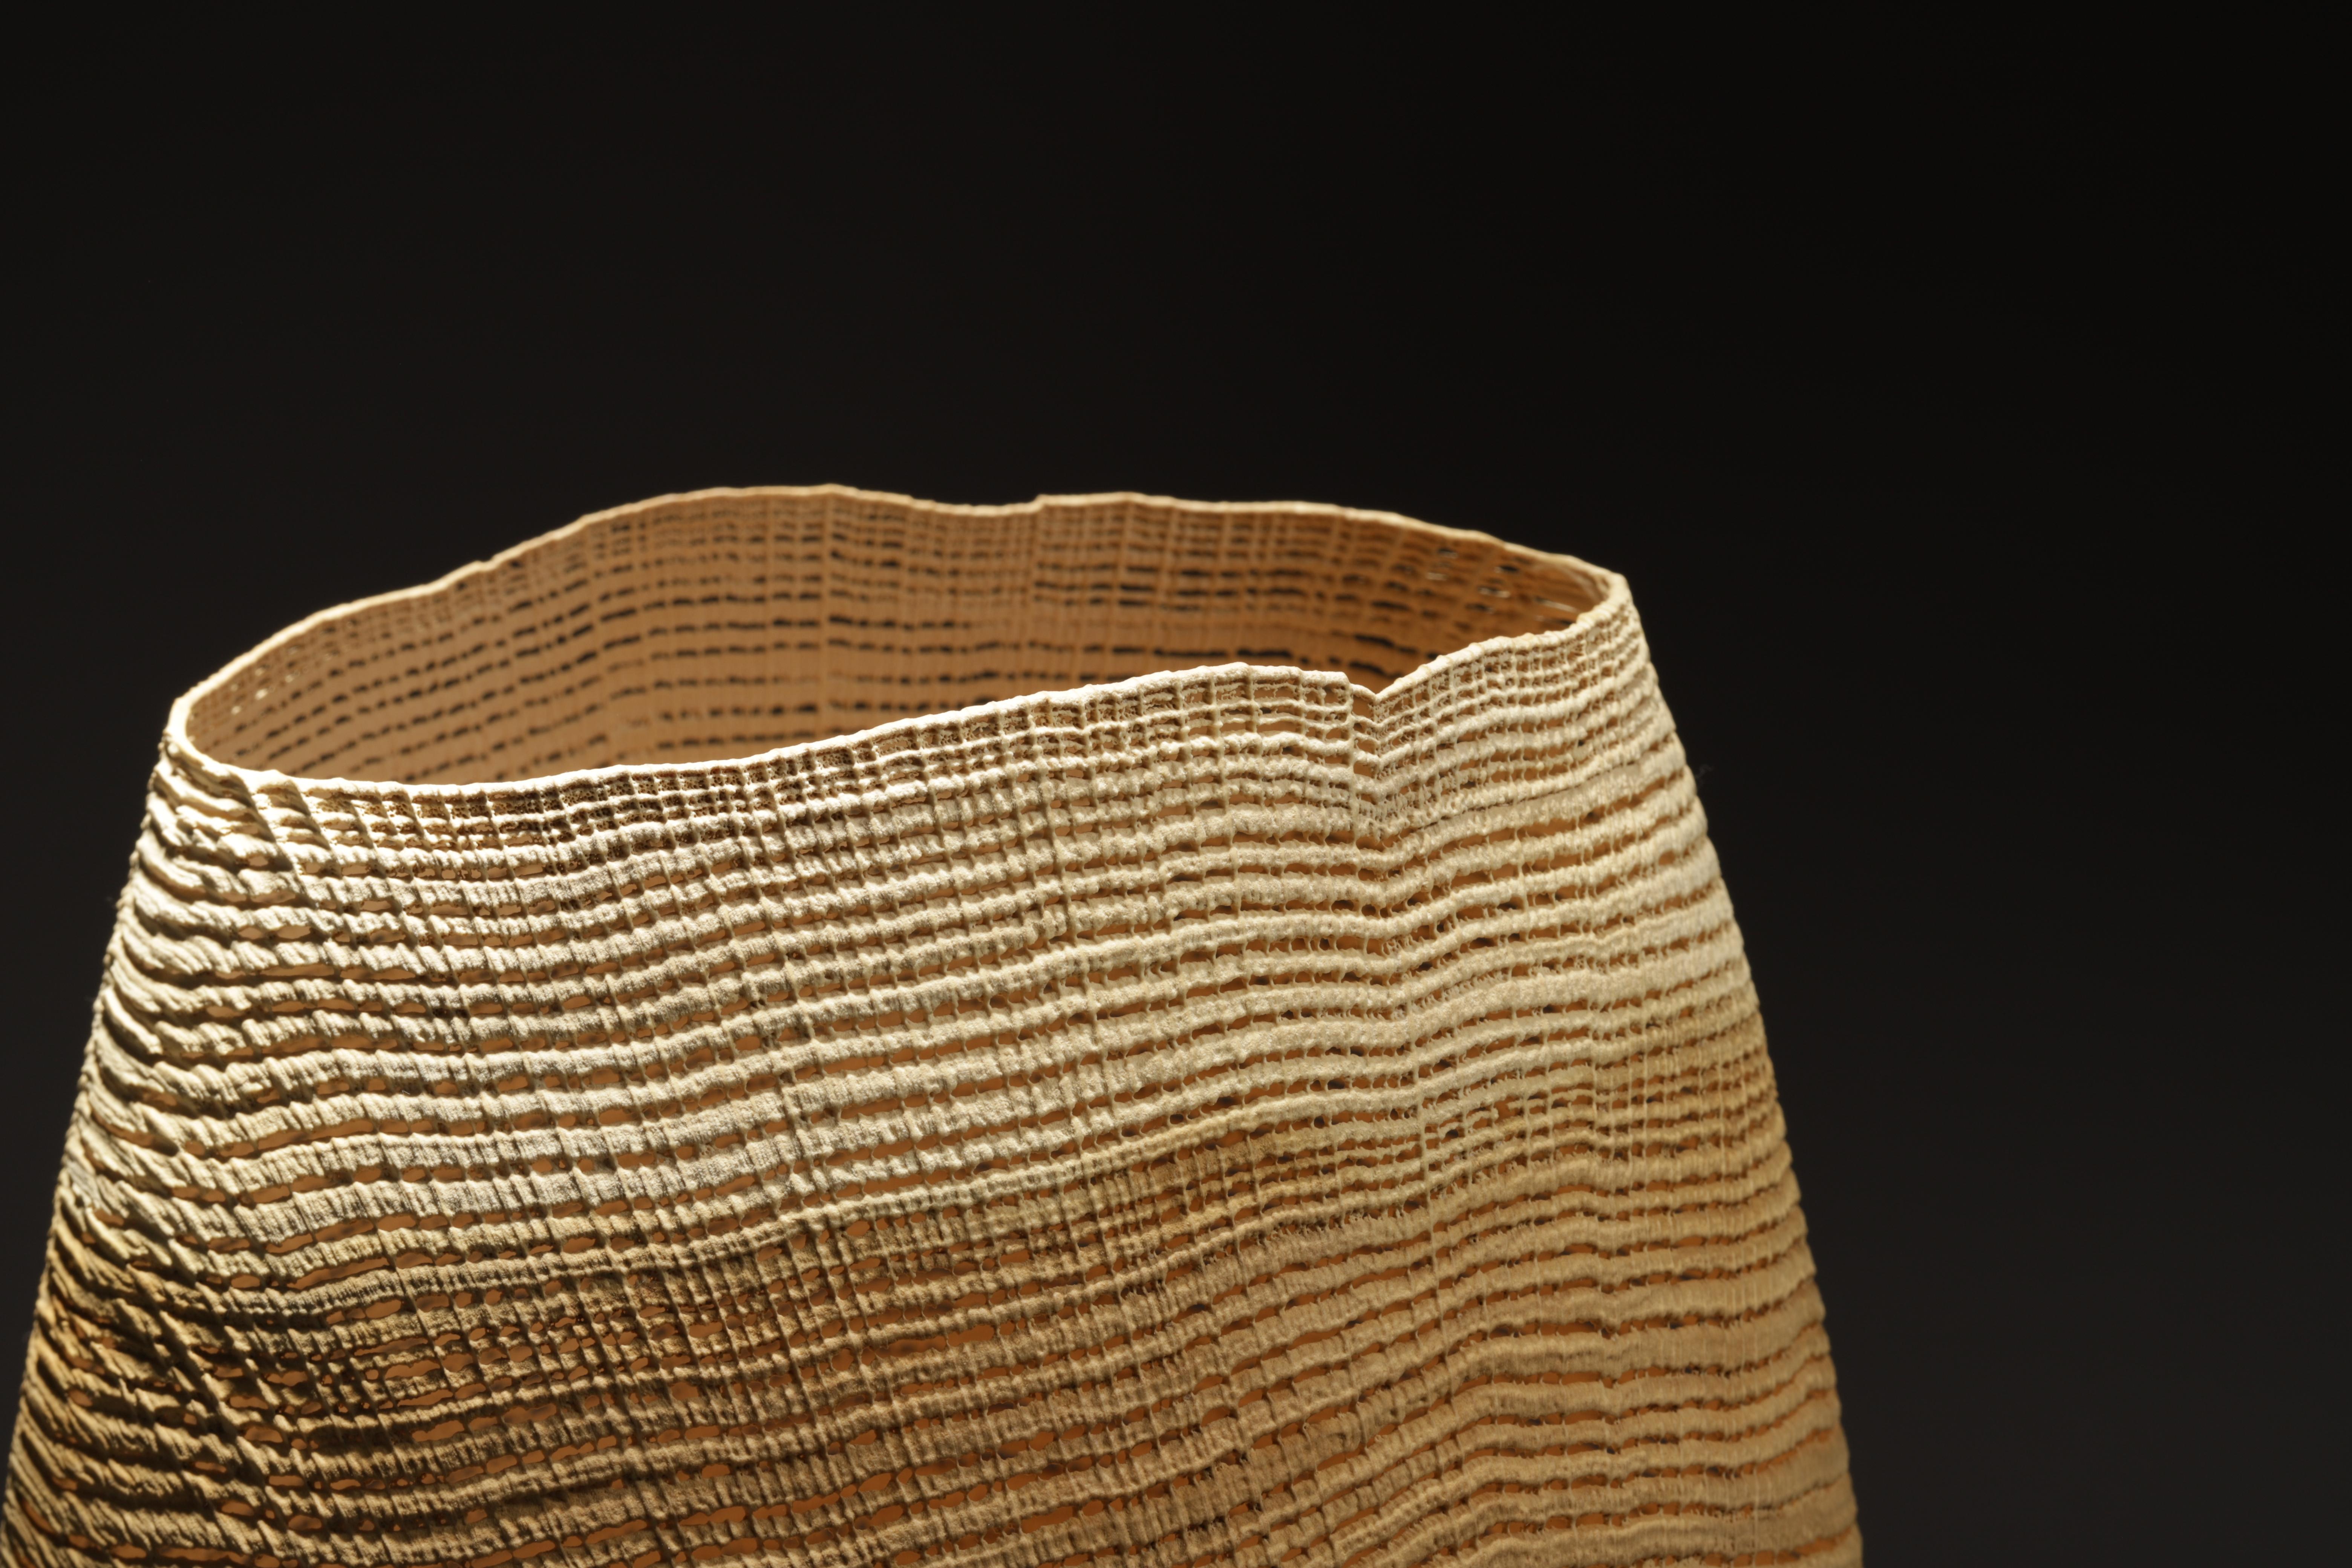 Inspired by the effect nature has on materials, Pascal Oudet’s wood sculptures are intricate filled with complex yet simple details. Born in 1972 in Vesoul, France and trained in engineering Oudet started woodturning in 2006. Since then, he has